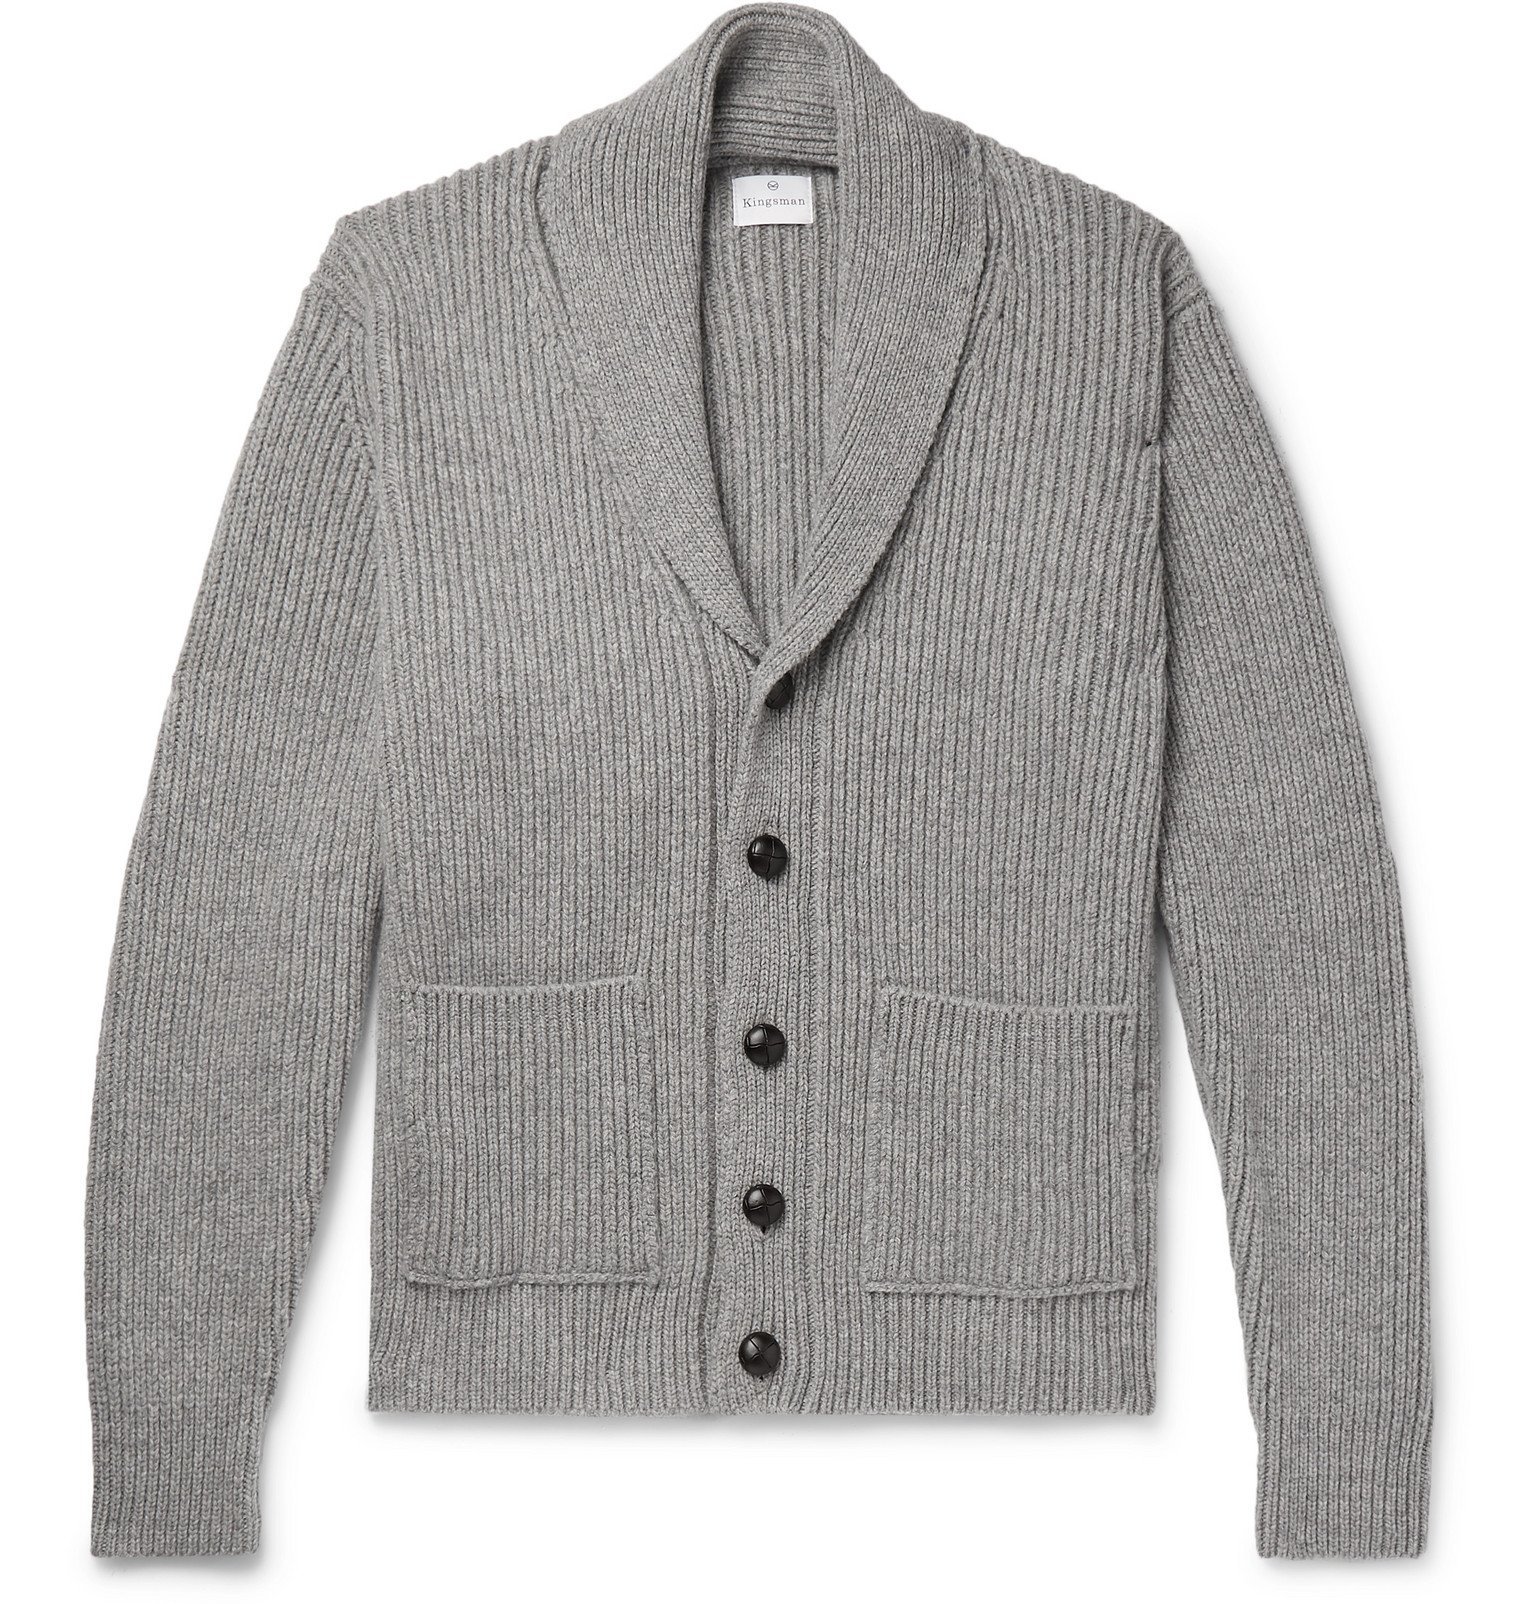 Kingsman - Shawl-Collar Ribbed Wool and Cashmere-Blend Cardigan - Gray ...